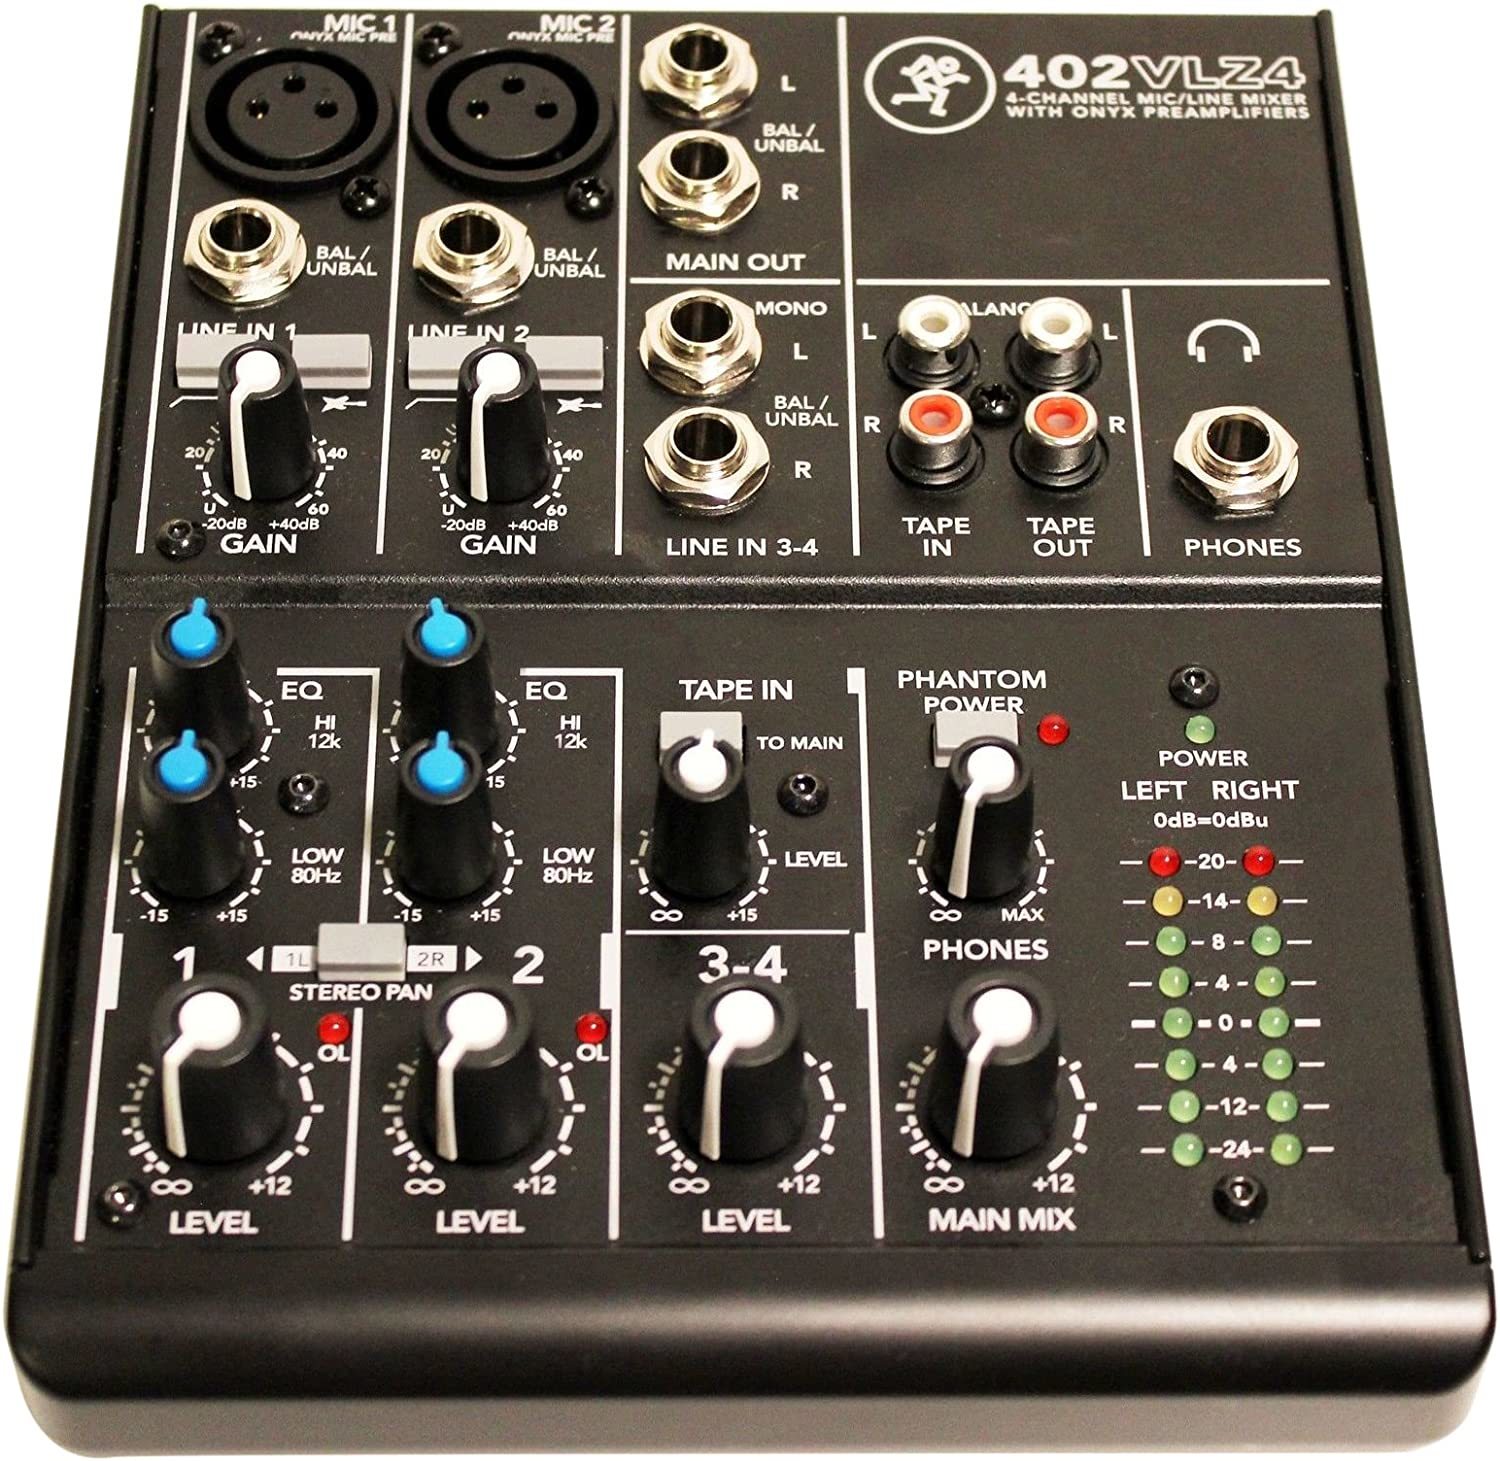 Mackie 402VLZ4, 4-channel Ultra Compact Mixer with High Quality Onyx Preamps - $134.99